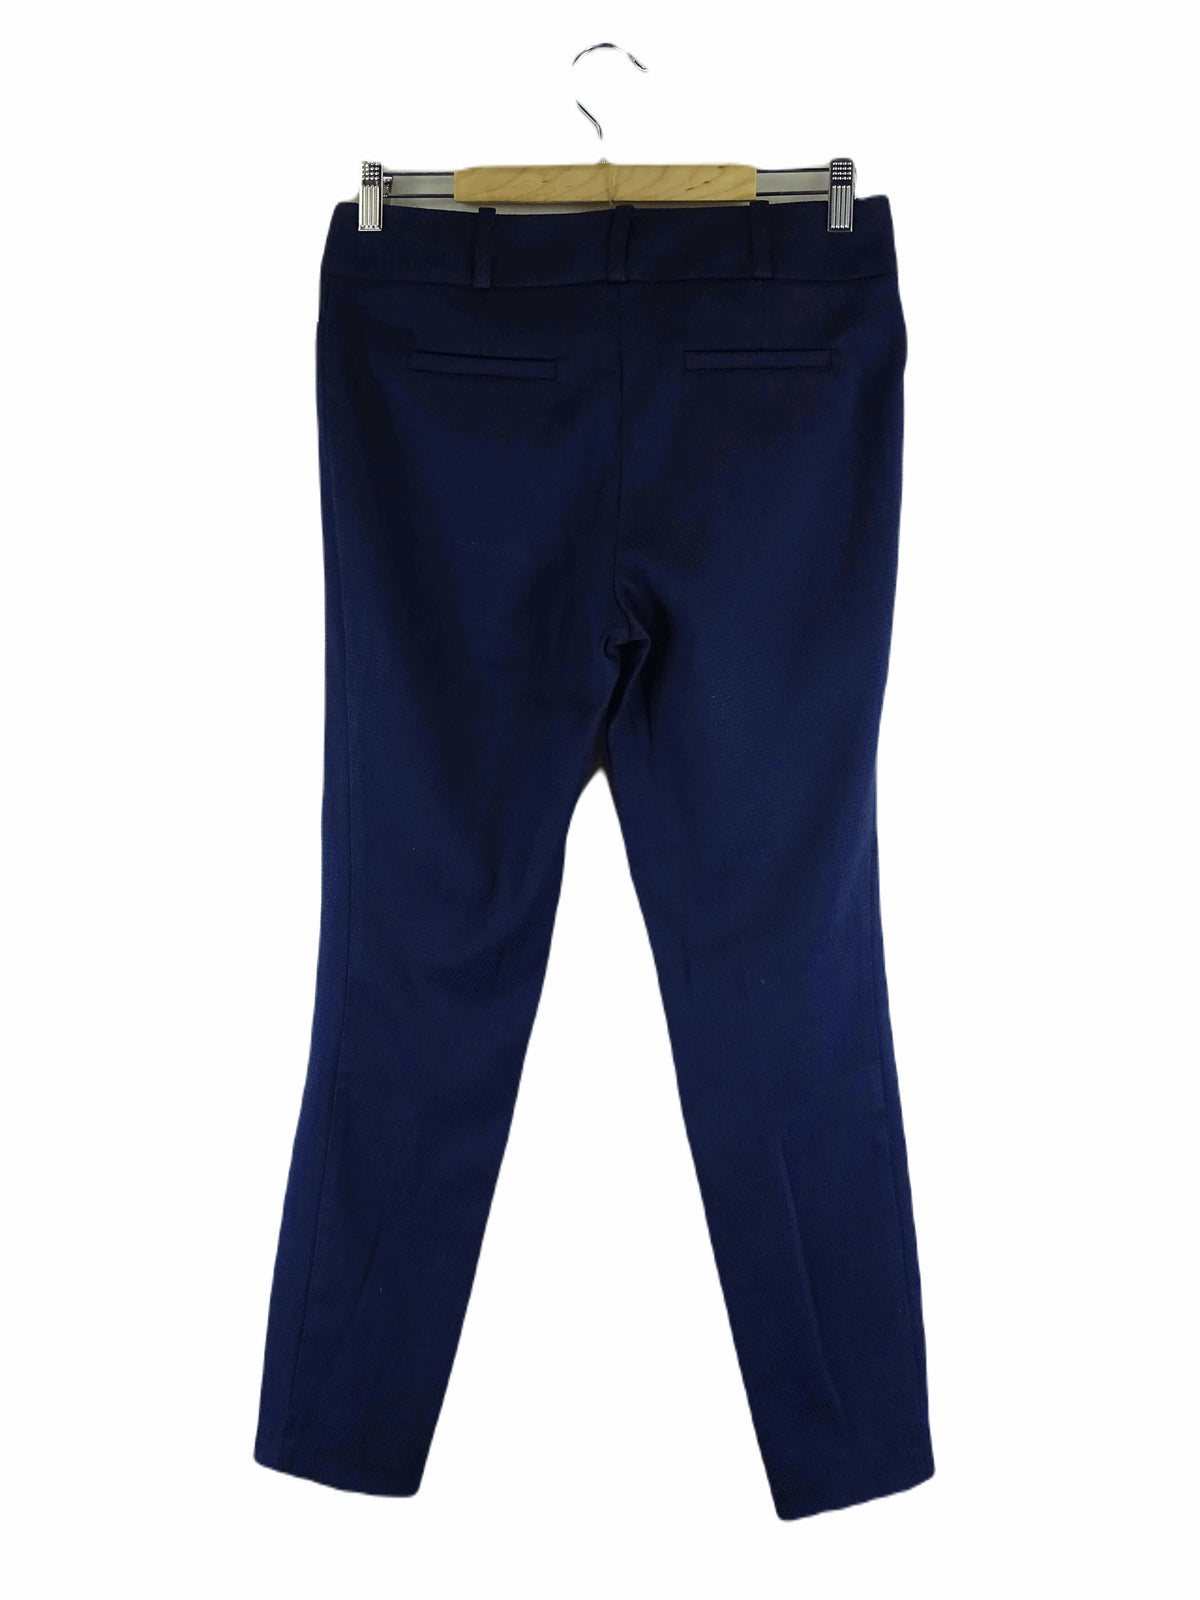 Review Blue Work Pants 10